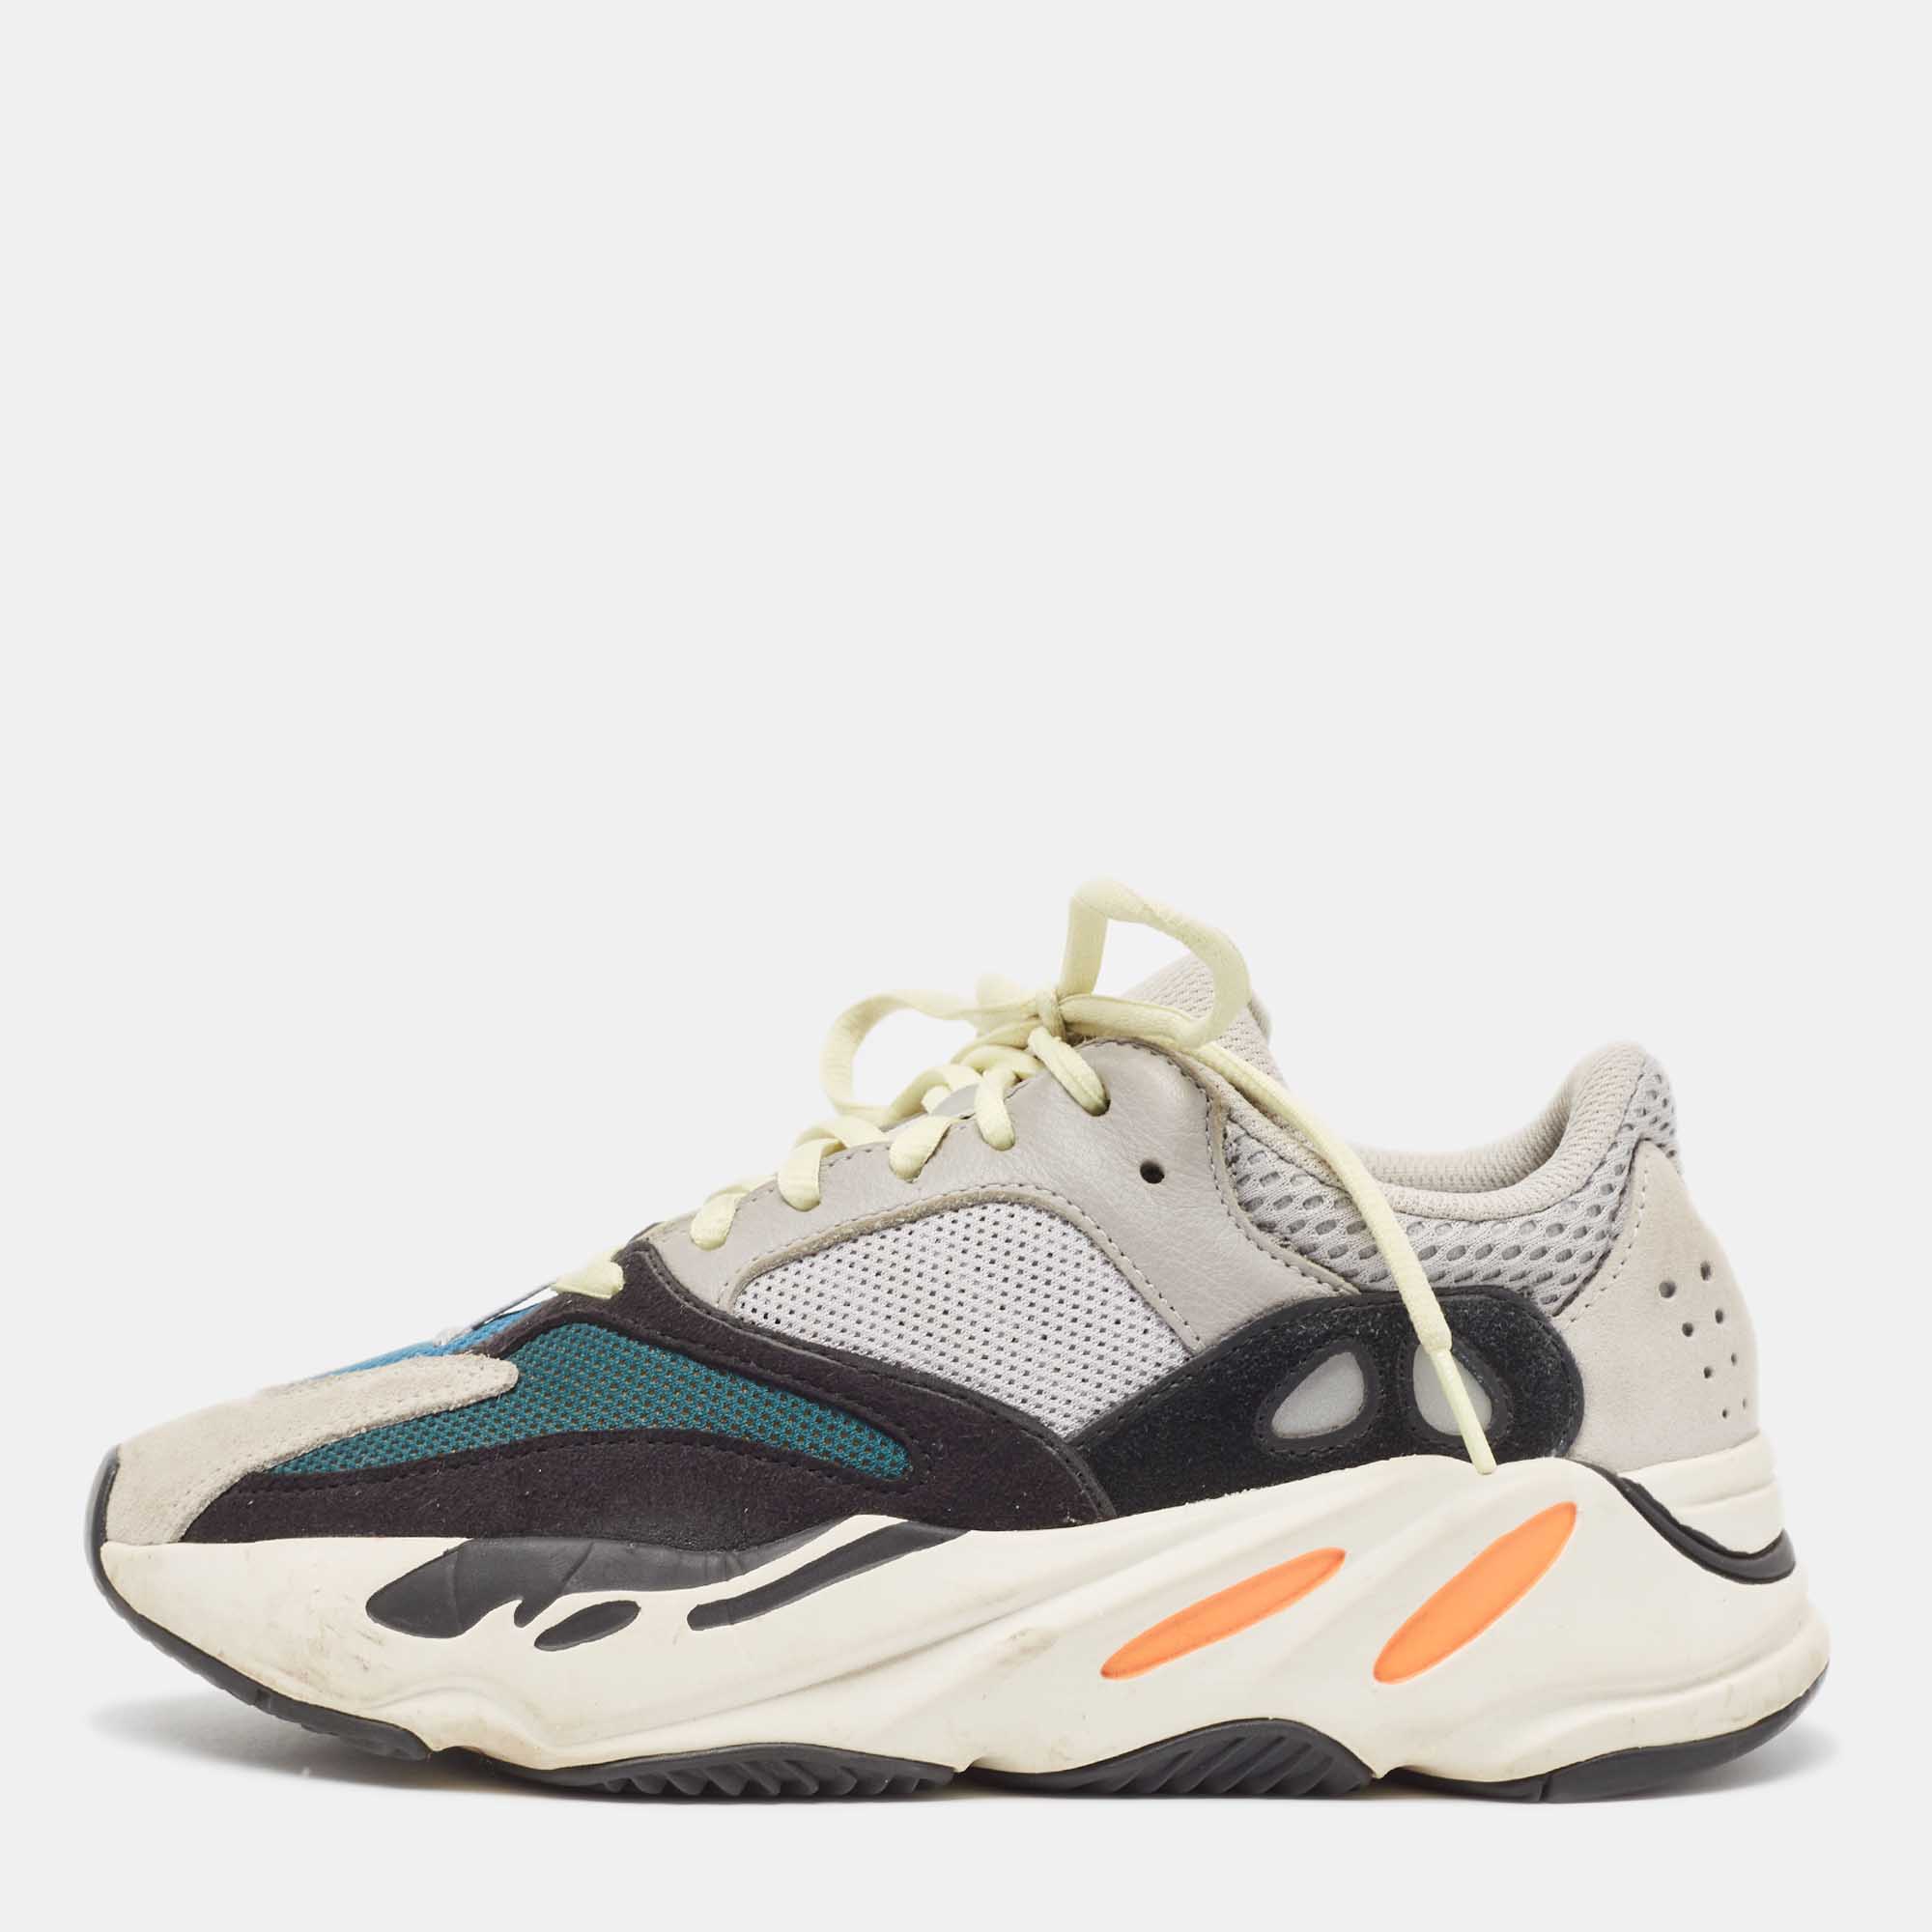 

Yeezy x Adidas Multicolor Suede and Mesh Boost 700 Wave Runner Sneakers Size 39 1/3, Grey